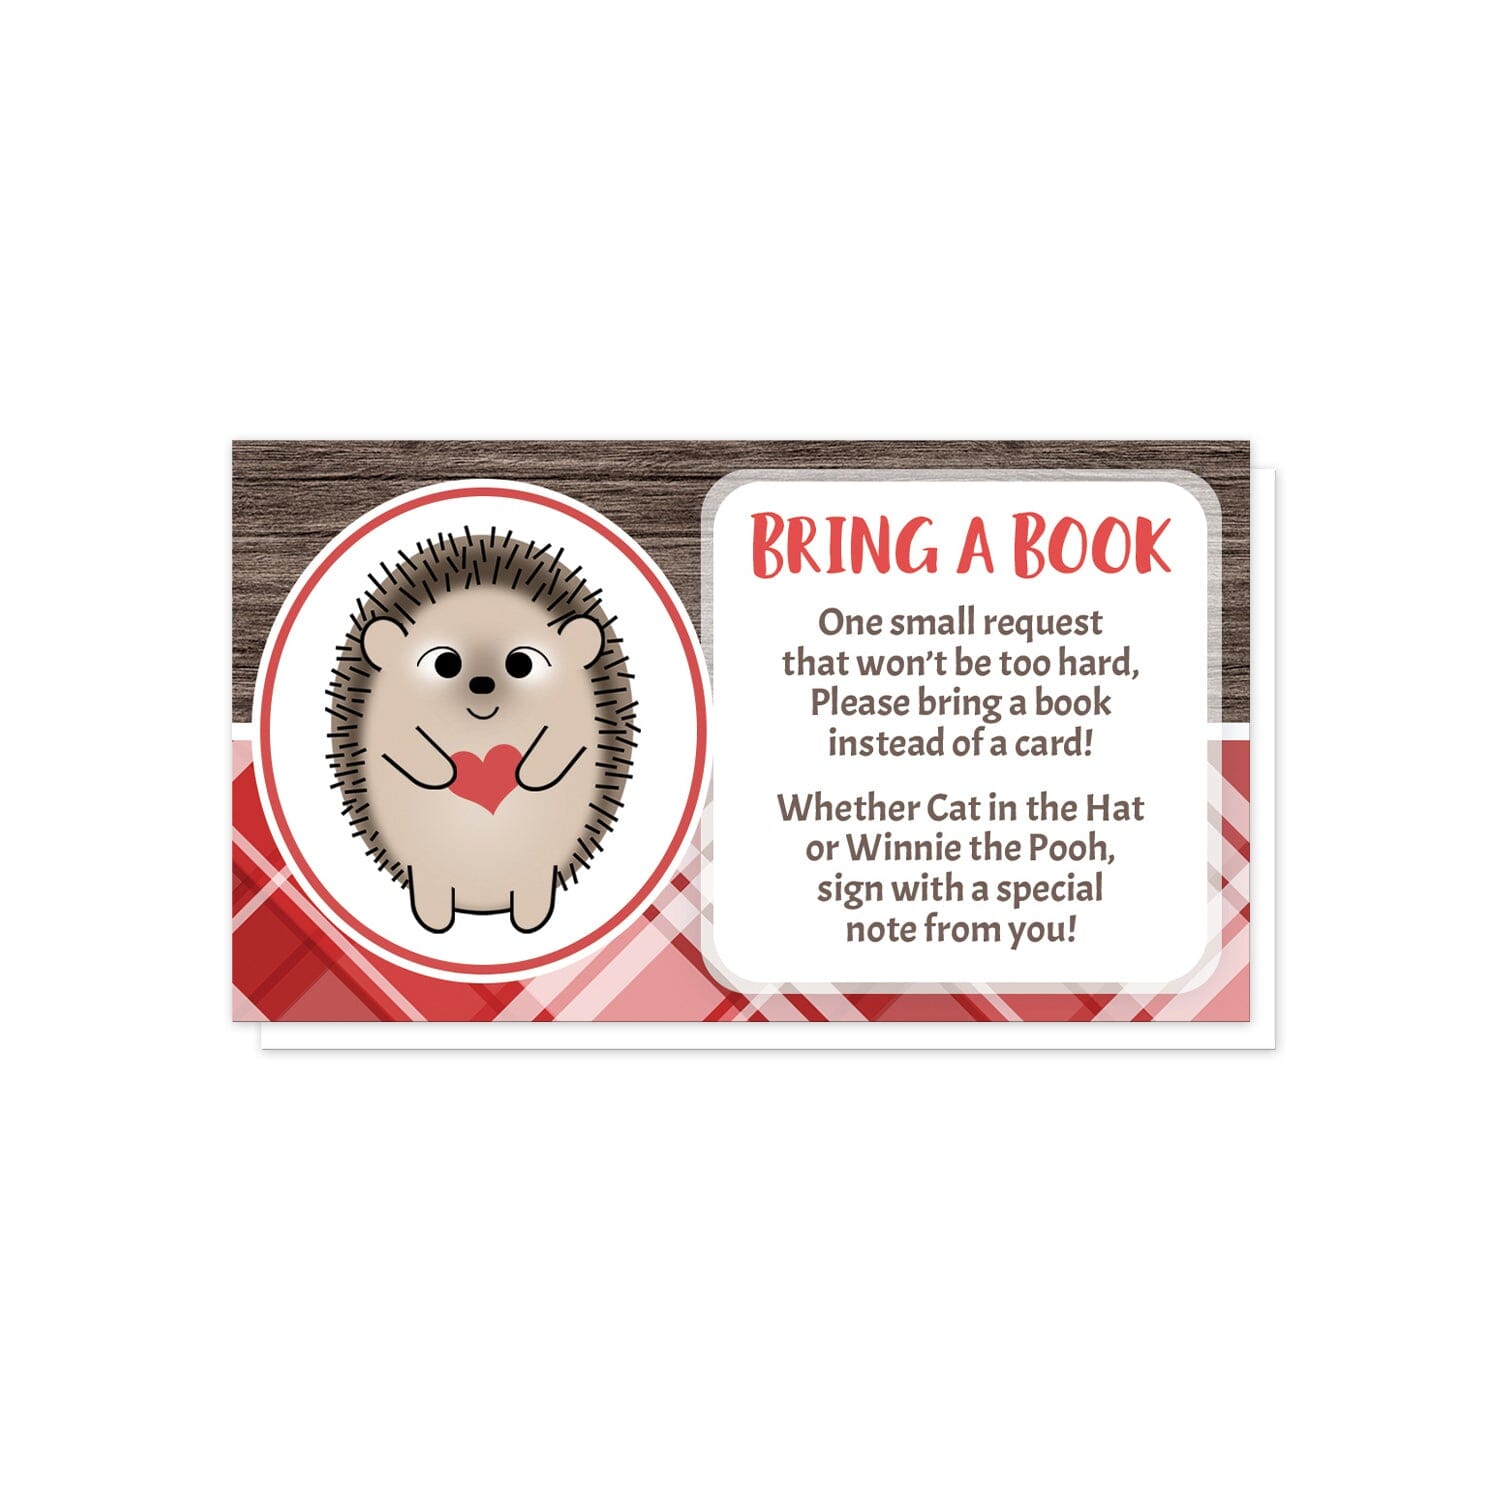 Rustic Hedgehog Red Plaid Bring a Book Cards at Artistically Invited. Adorable rustic hedgehog red plaid bring a book cards illustrated with a cute and smiling hedgehog in a white and red oval on the left side over a rustic brown wood background along the top and a red plaid pattern background along the bottom. Your book request details are printed in red and brown in a white rectangular area over the background design on the right side.